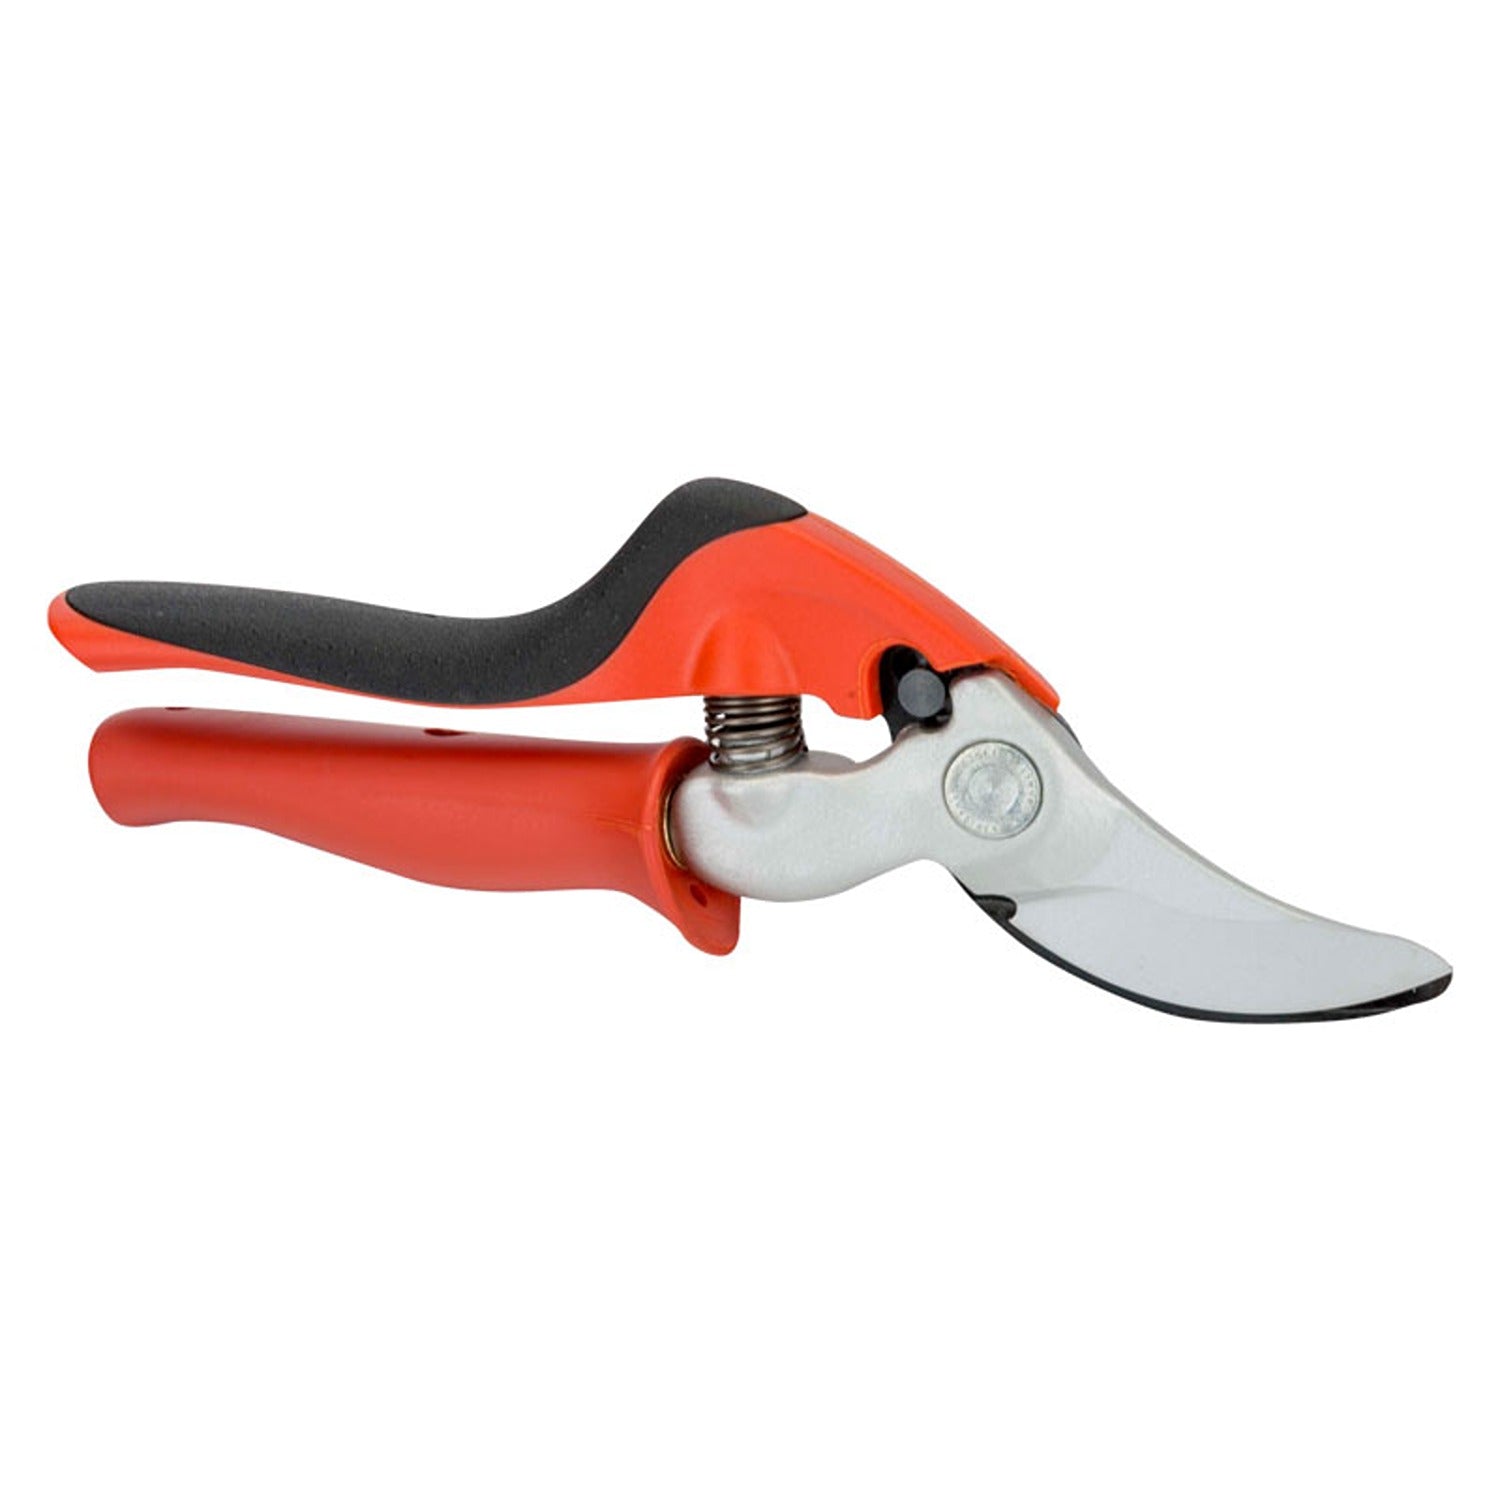 BAHCO PG-R-M ERGO Bypass Secateurs with Rotating Handle - 20 mm - Premium Secateurs from BAHCO - Shop now at Yew Aik.